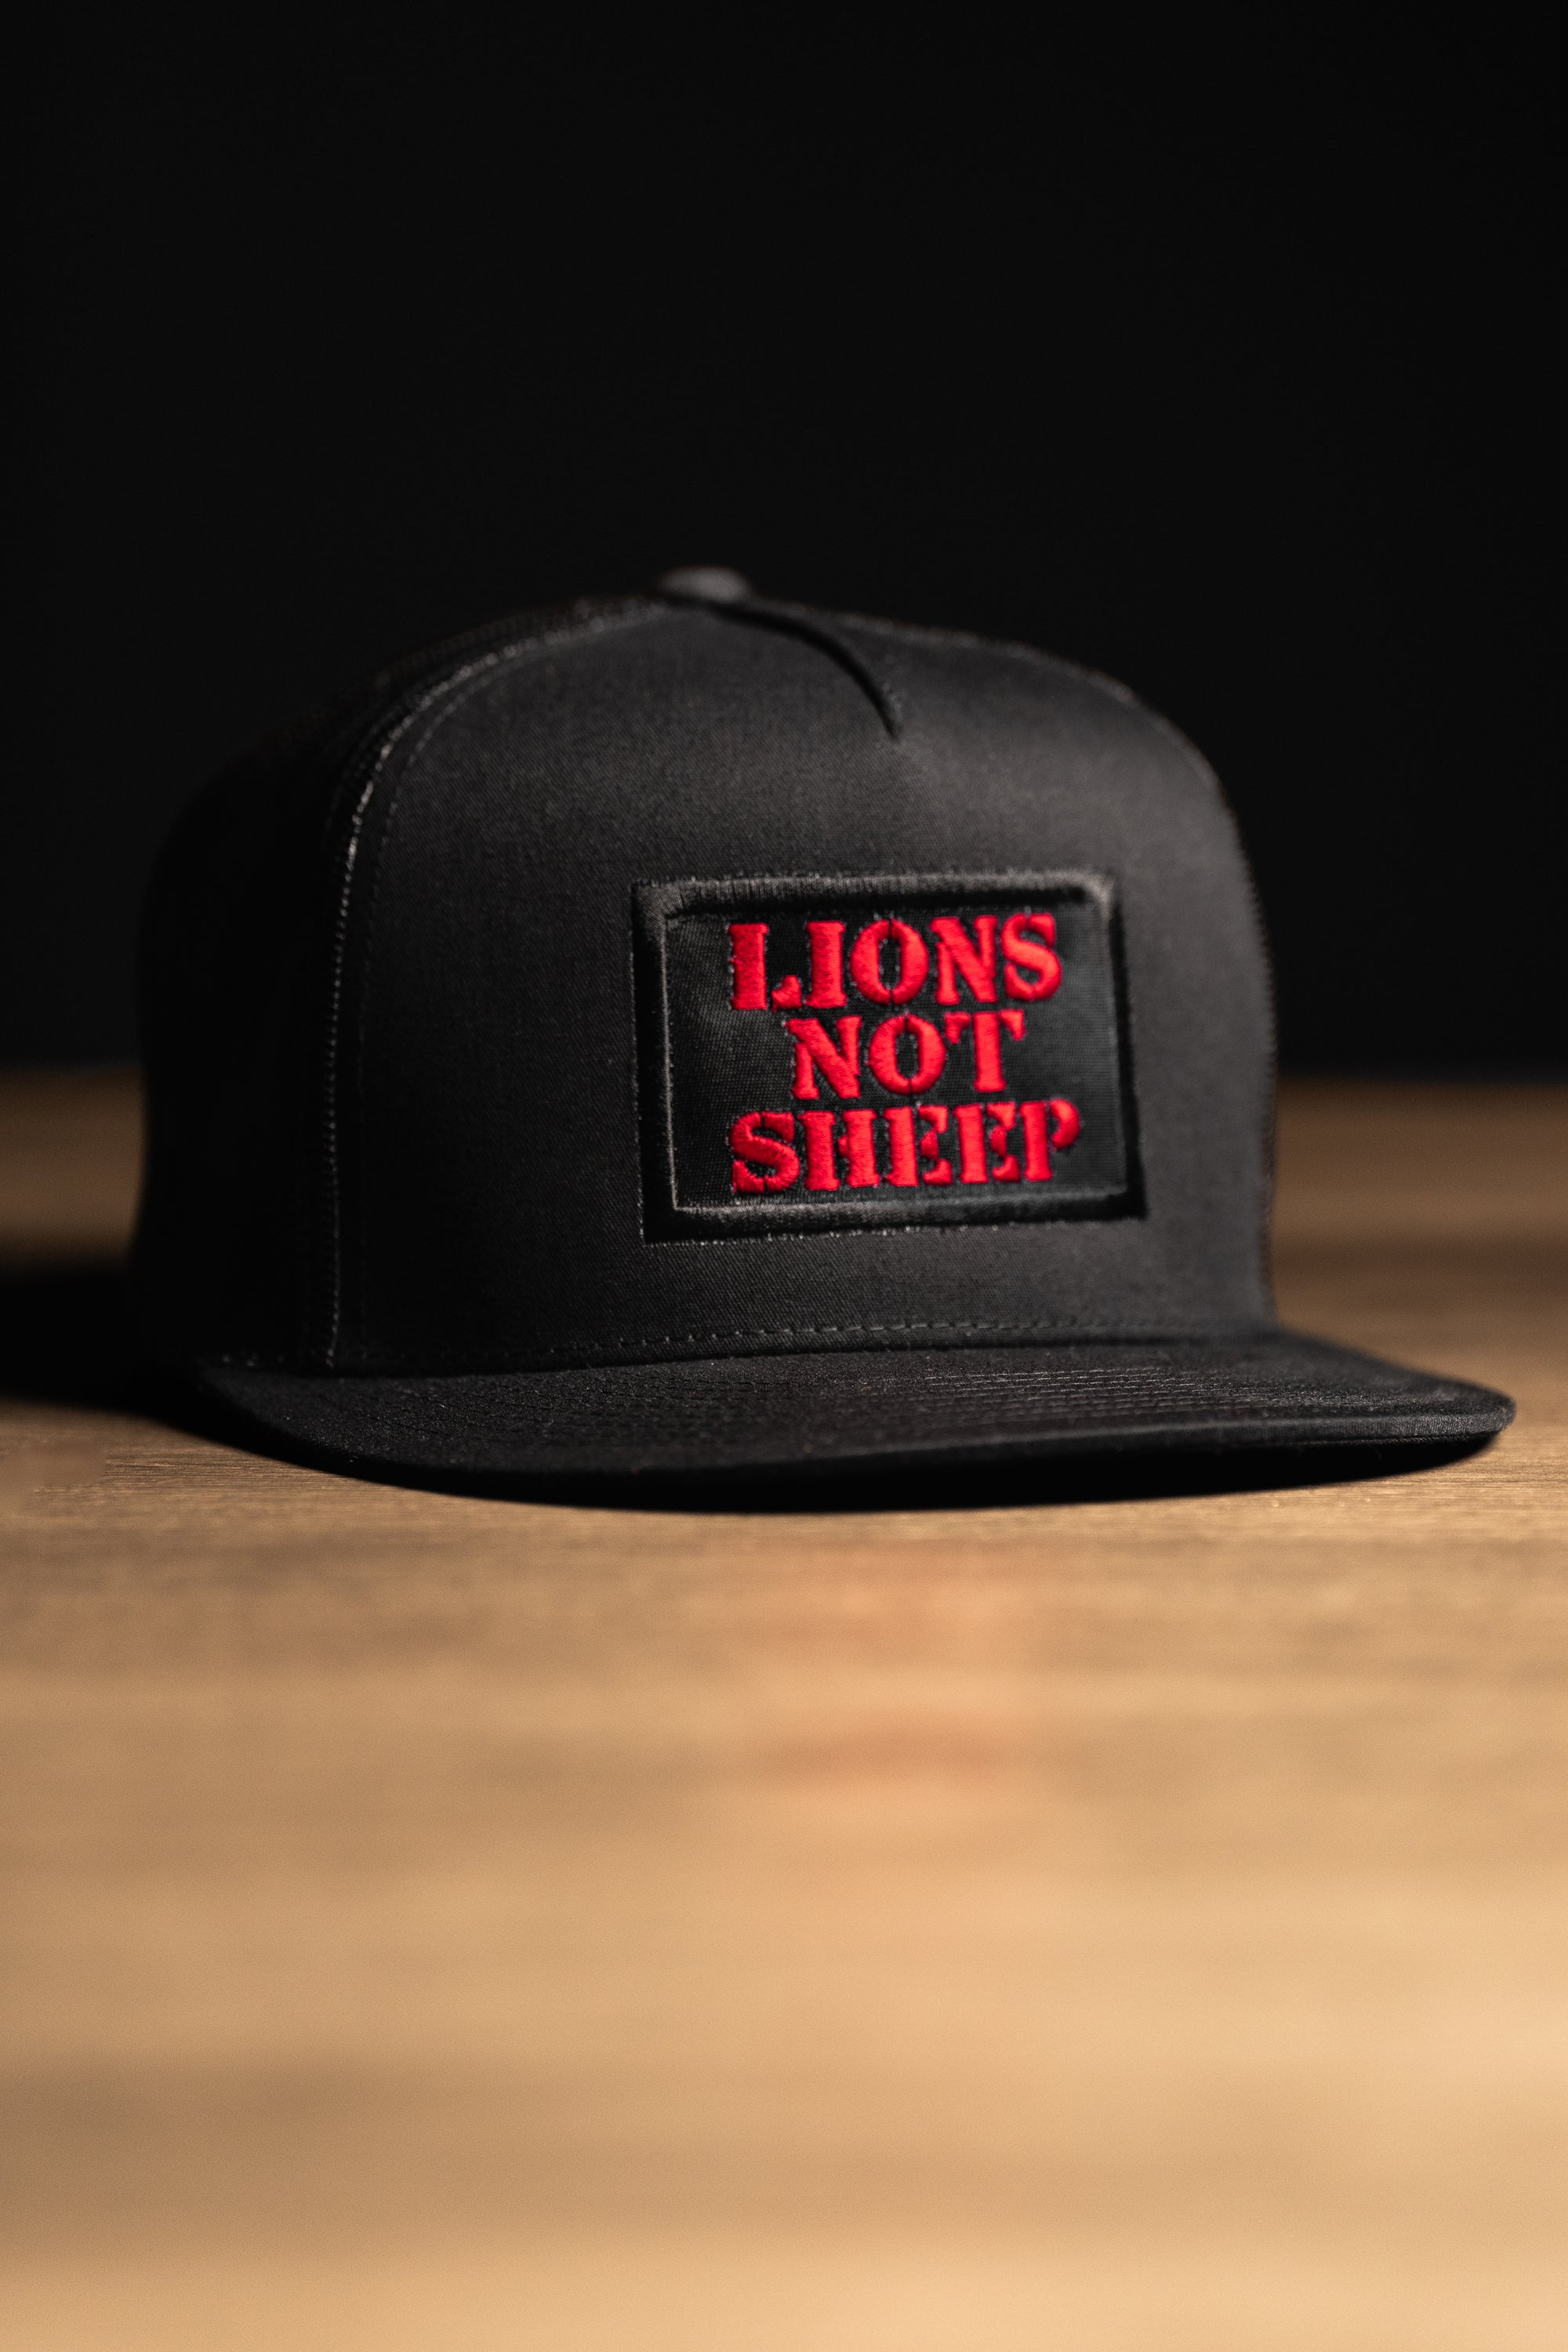 Limited Edition Red/Black Lions Not Sheep "OG" Trucker Hat (Mesh Back) - Lions Not Sheep ®